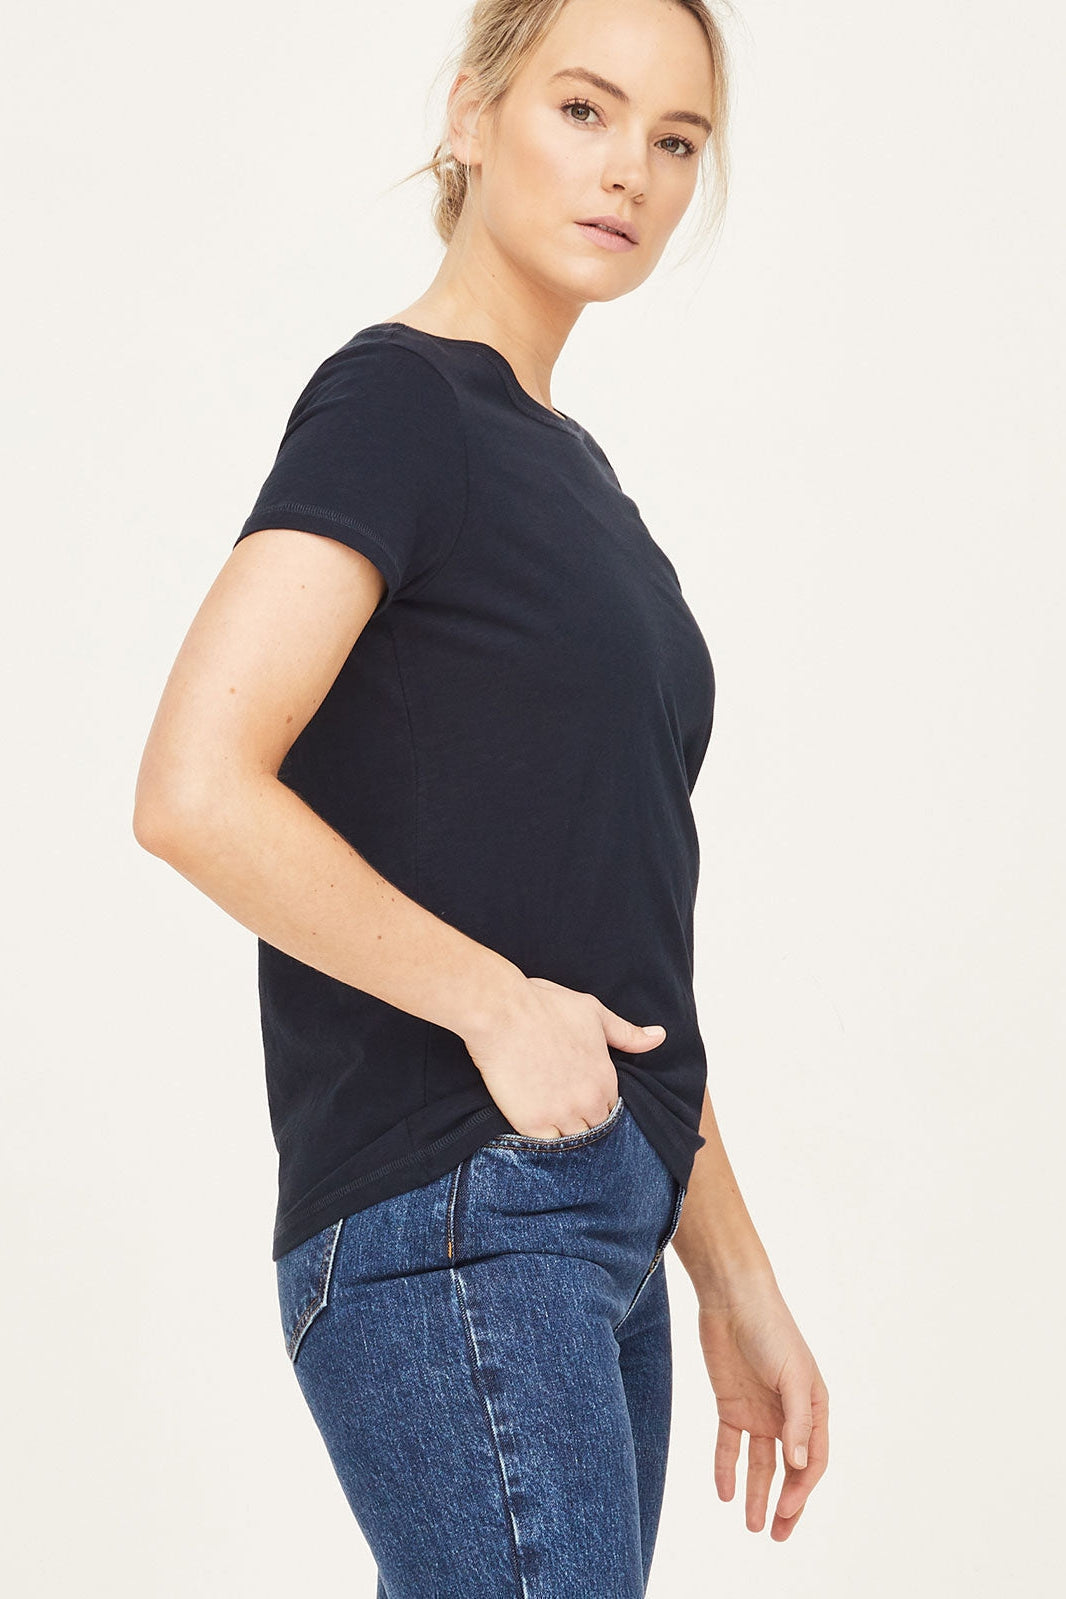 Thought Short Sleeved Fairtrade Organic Cotton T-Shirt in Navy-Womens-Ohh! By Gum - Shop Sustainable